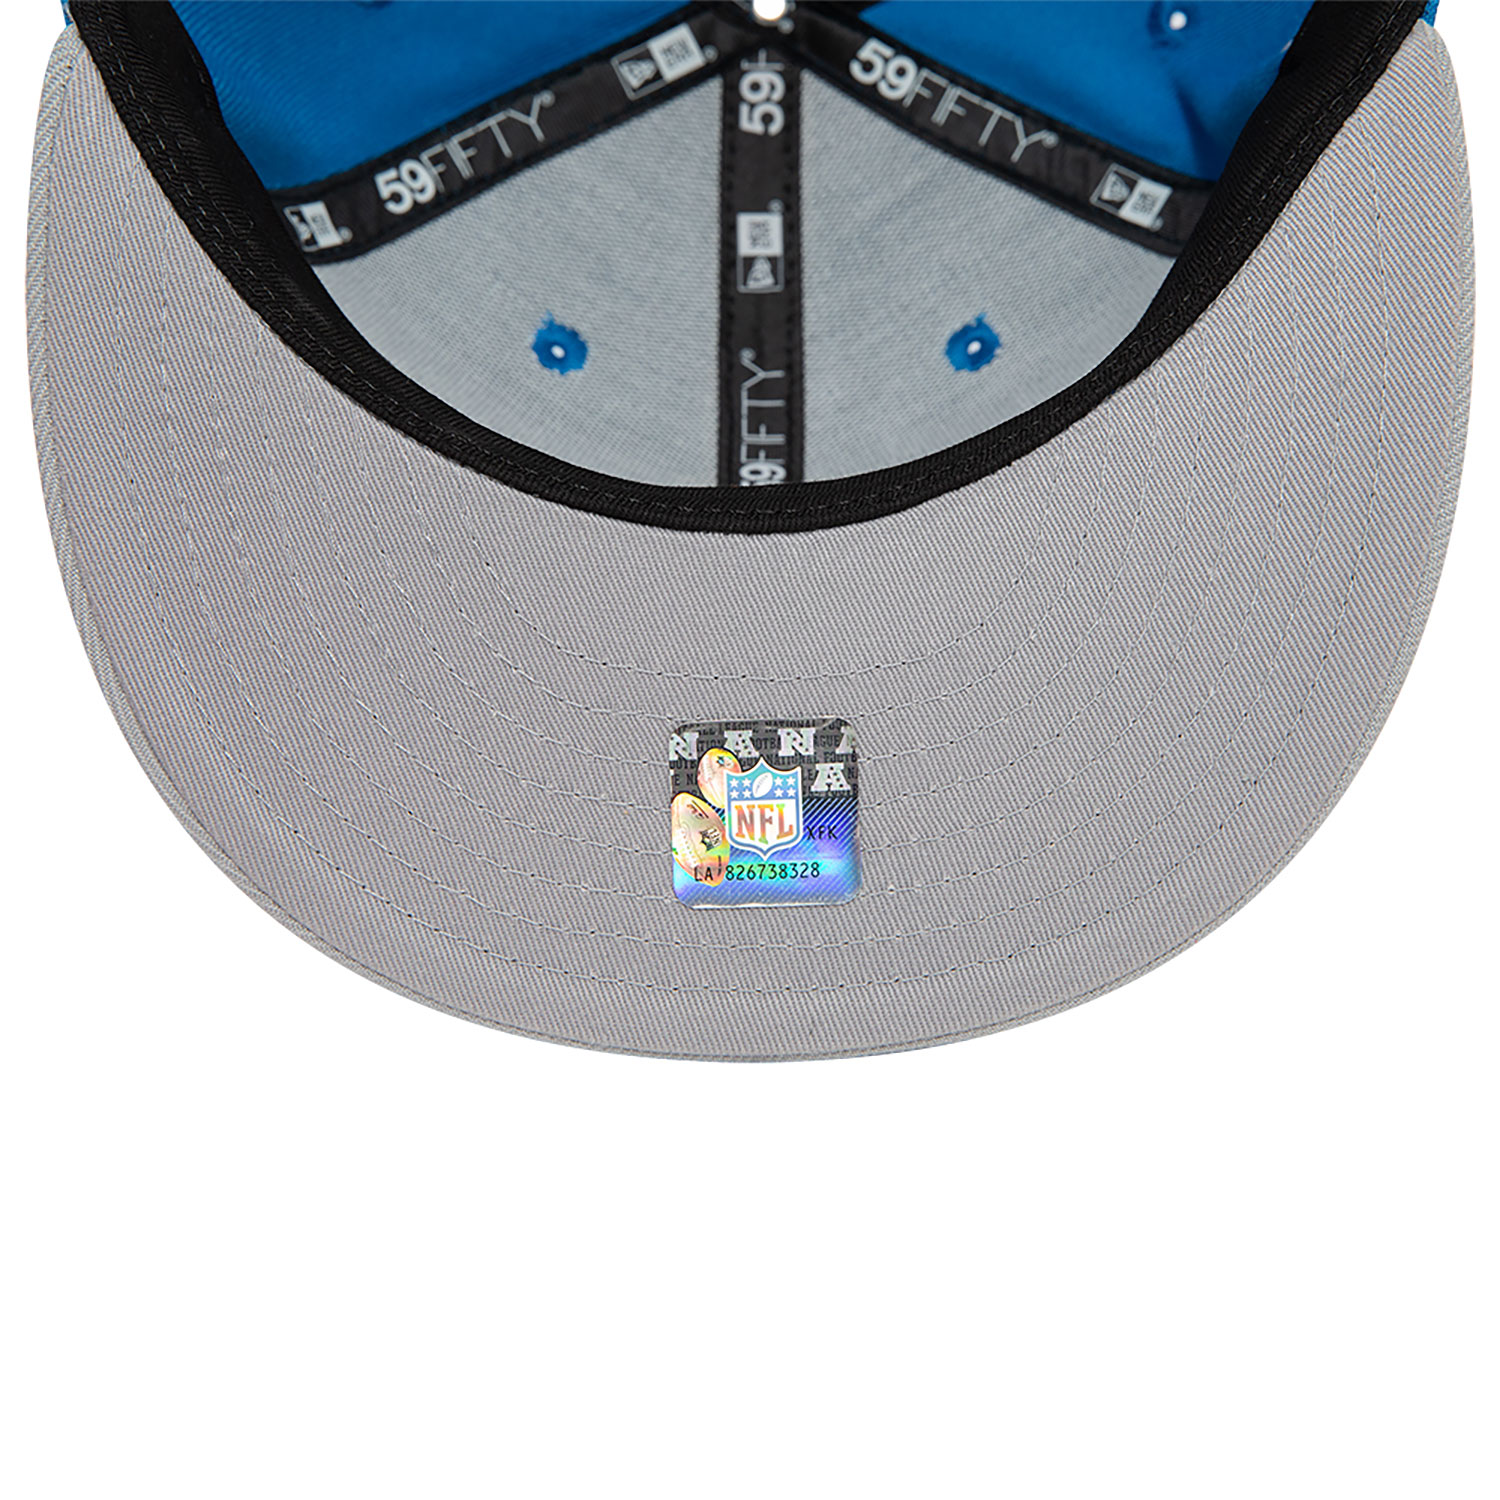 New Era 59Fifty Pittsburgh Steelers XL Super Bowl Patch Glow In